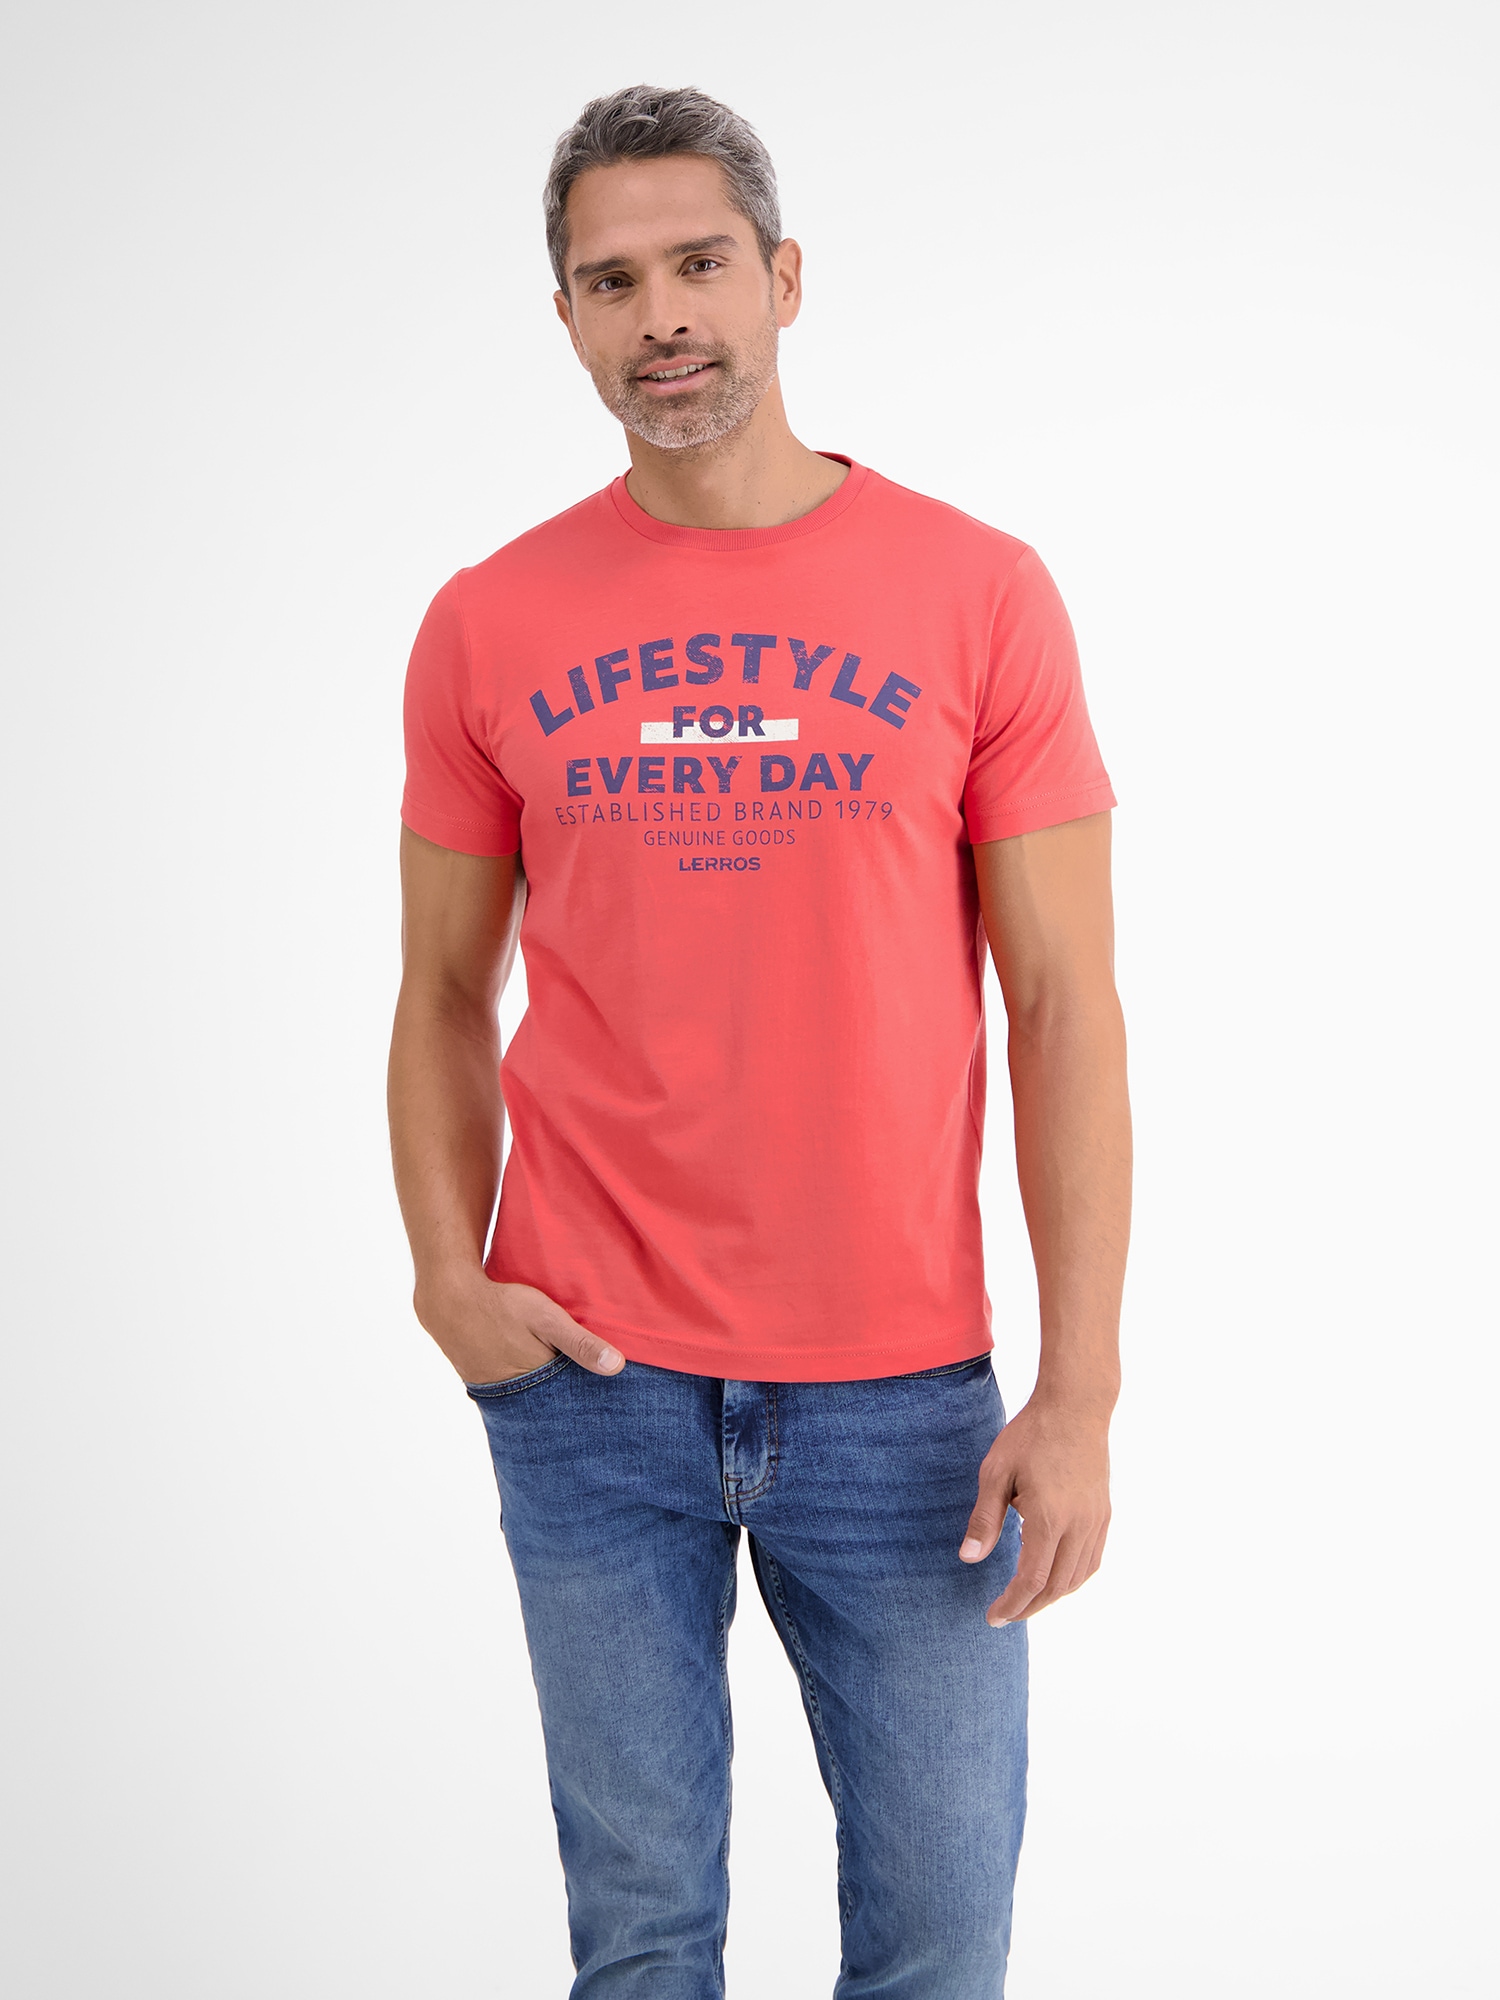 for day*« bei *Lifestyle ♕ every T-Shirt T-Shirt »LERROS LERROS